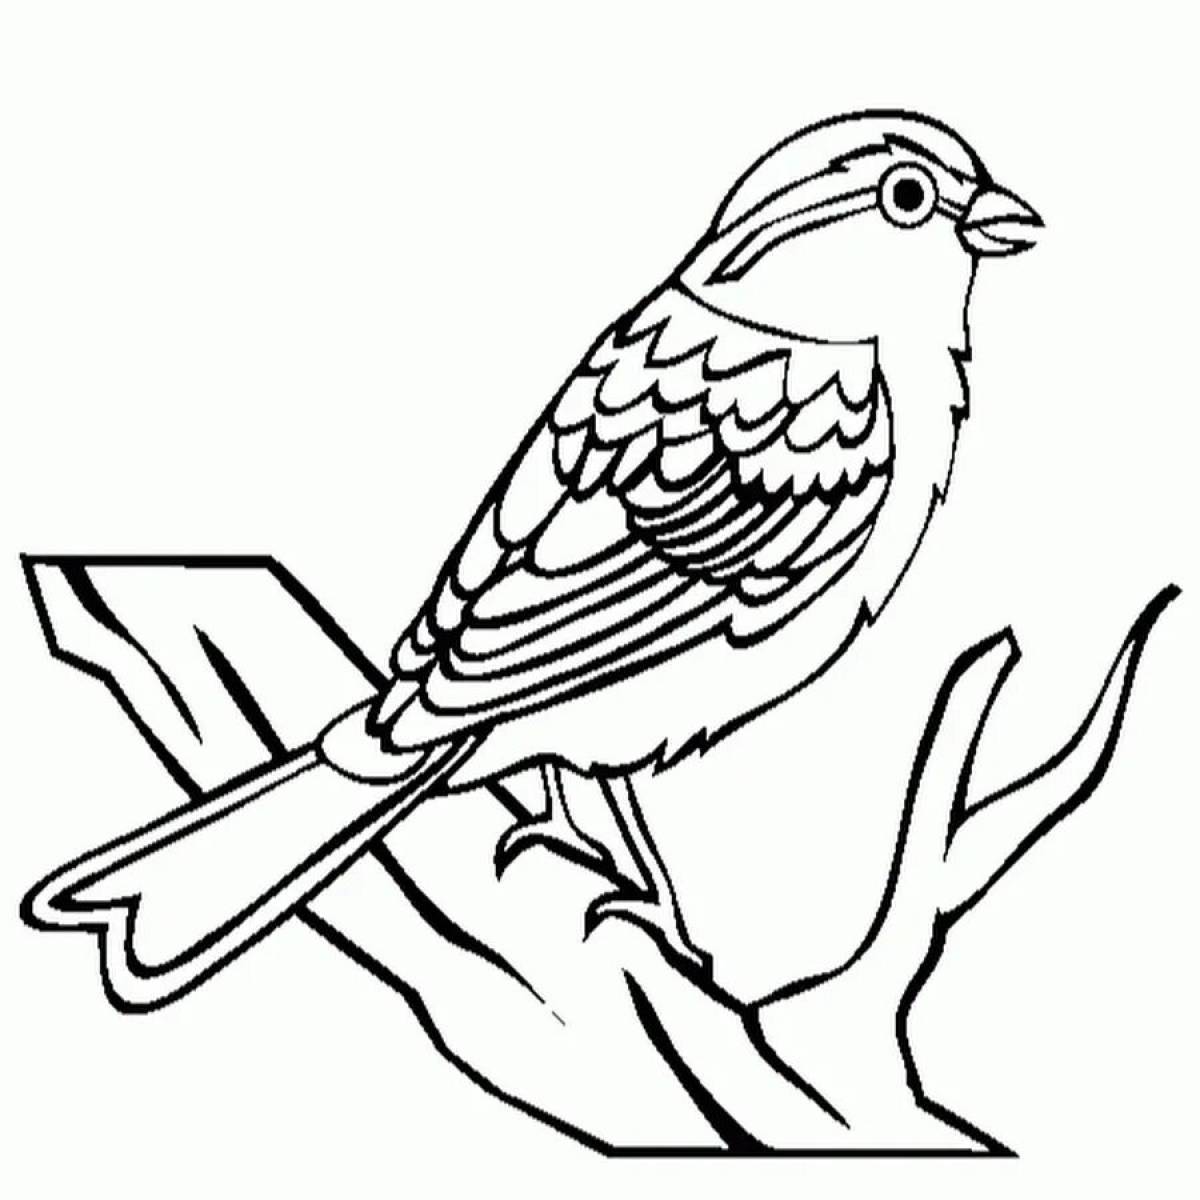 Sparrow holiday coloring book for kids